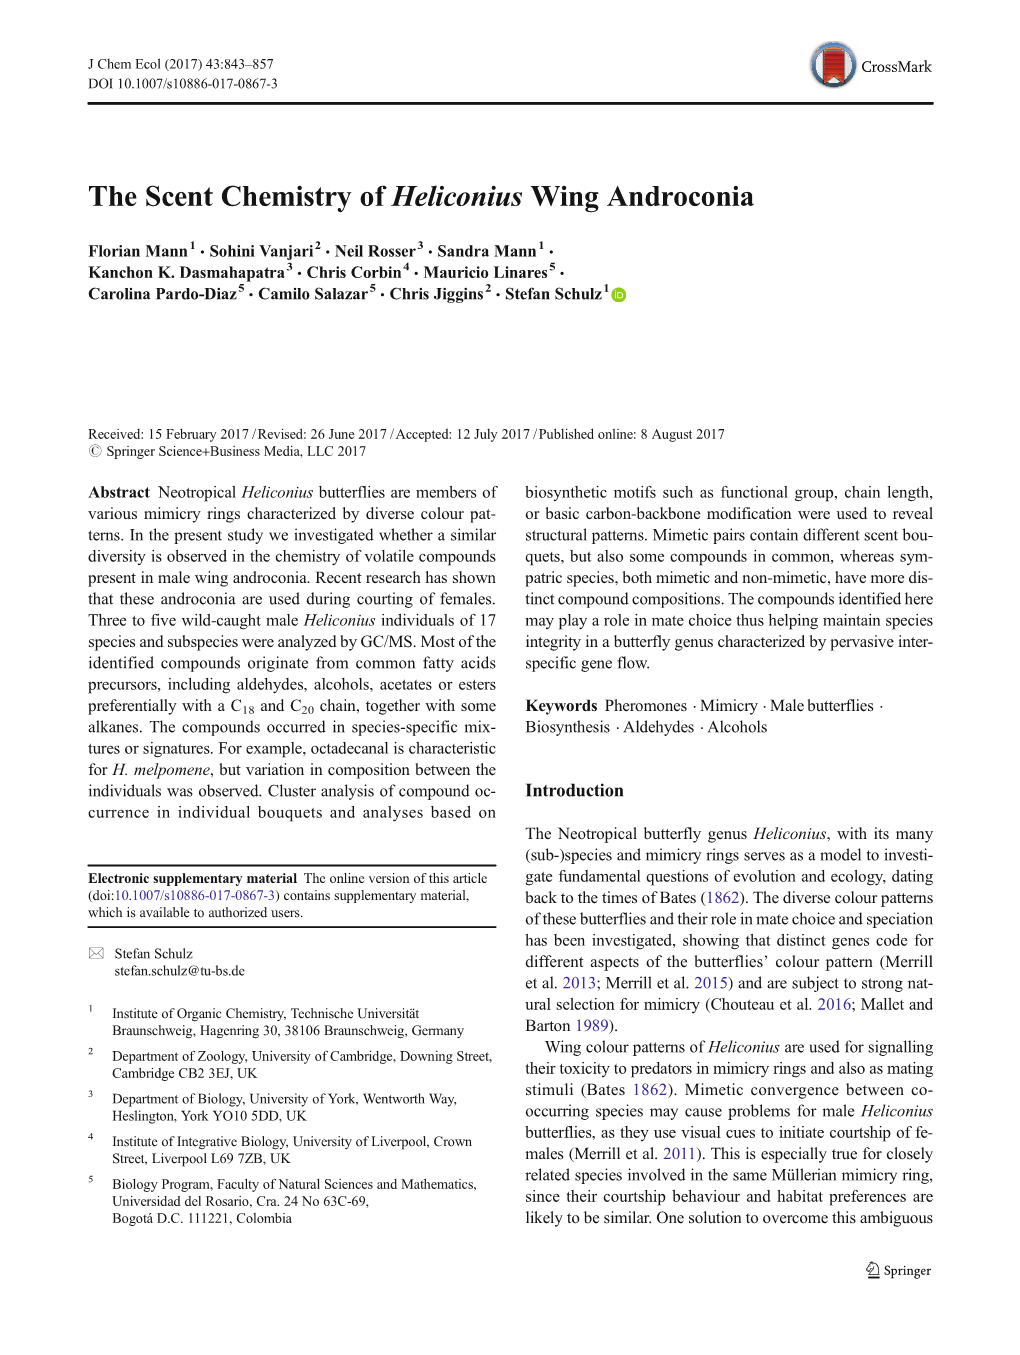 The Scent Chemistry of Heliconius Wing Androconia